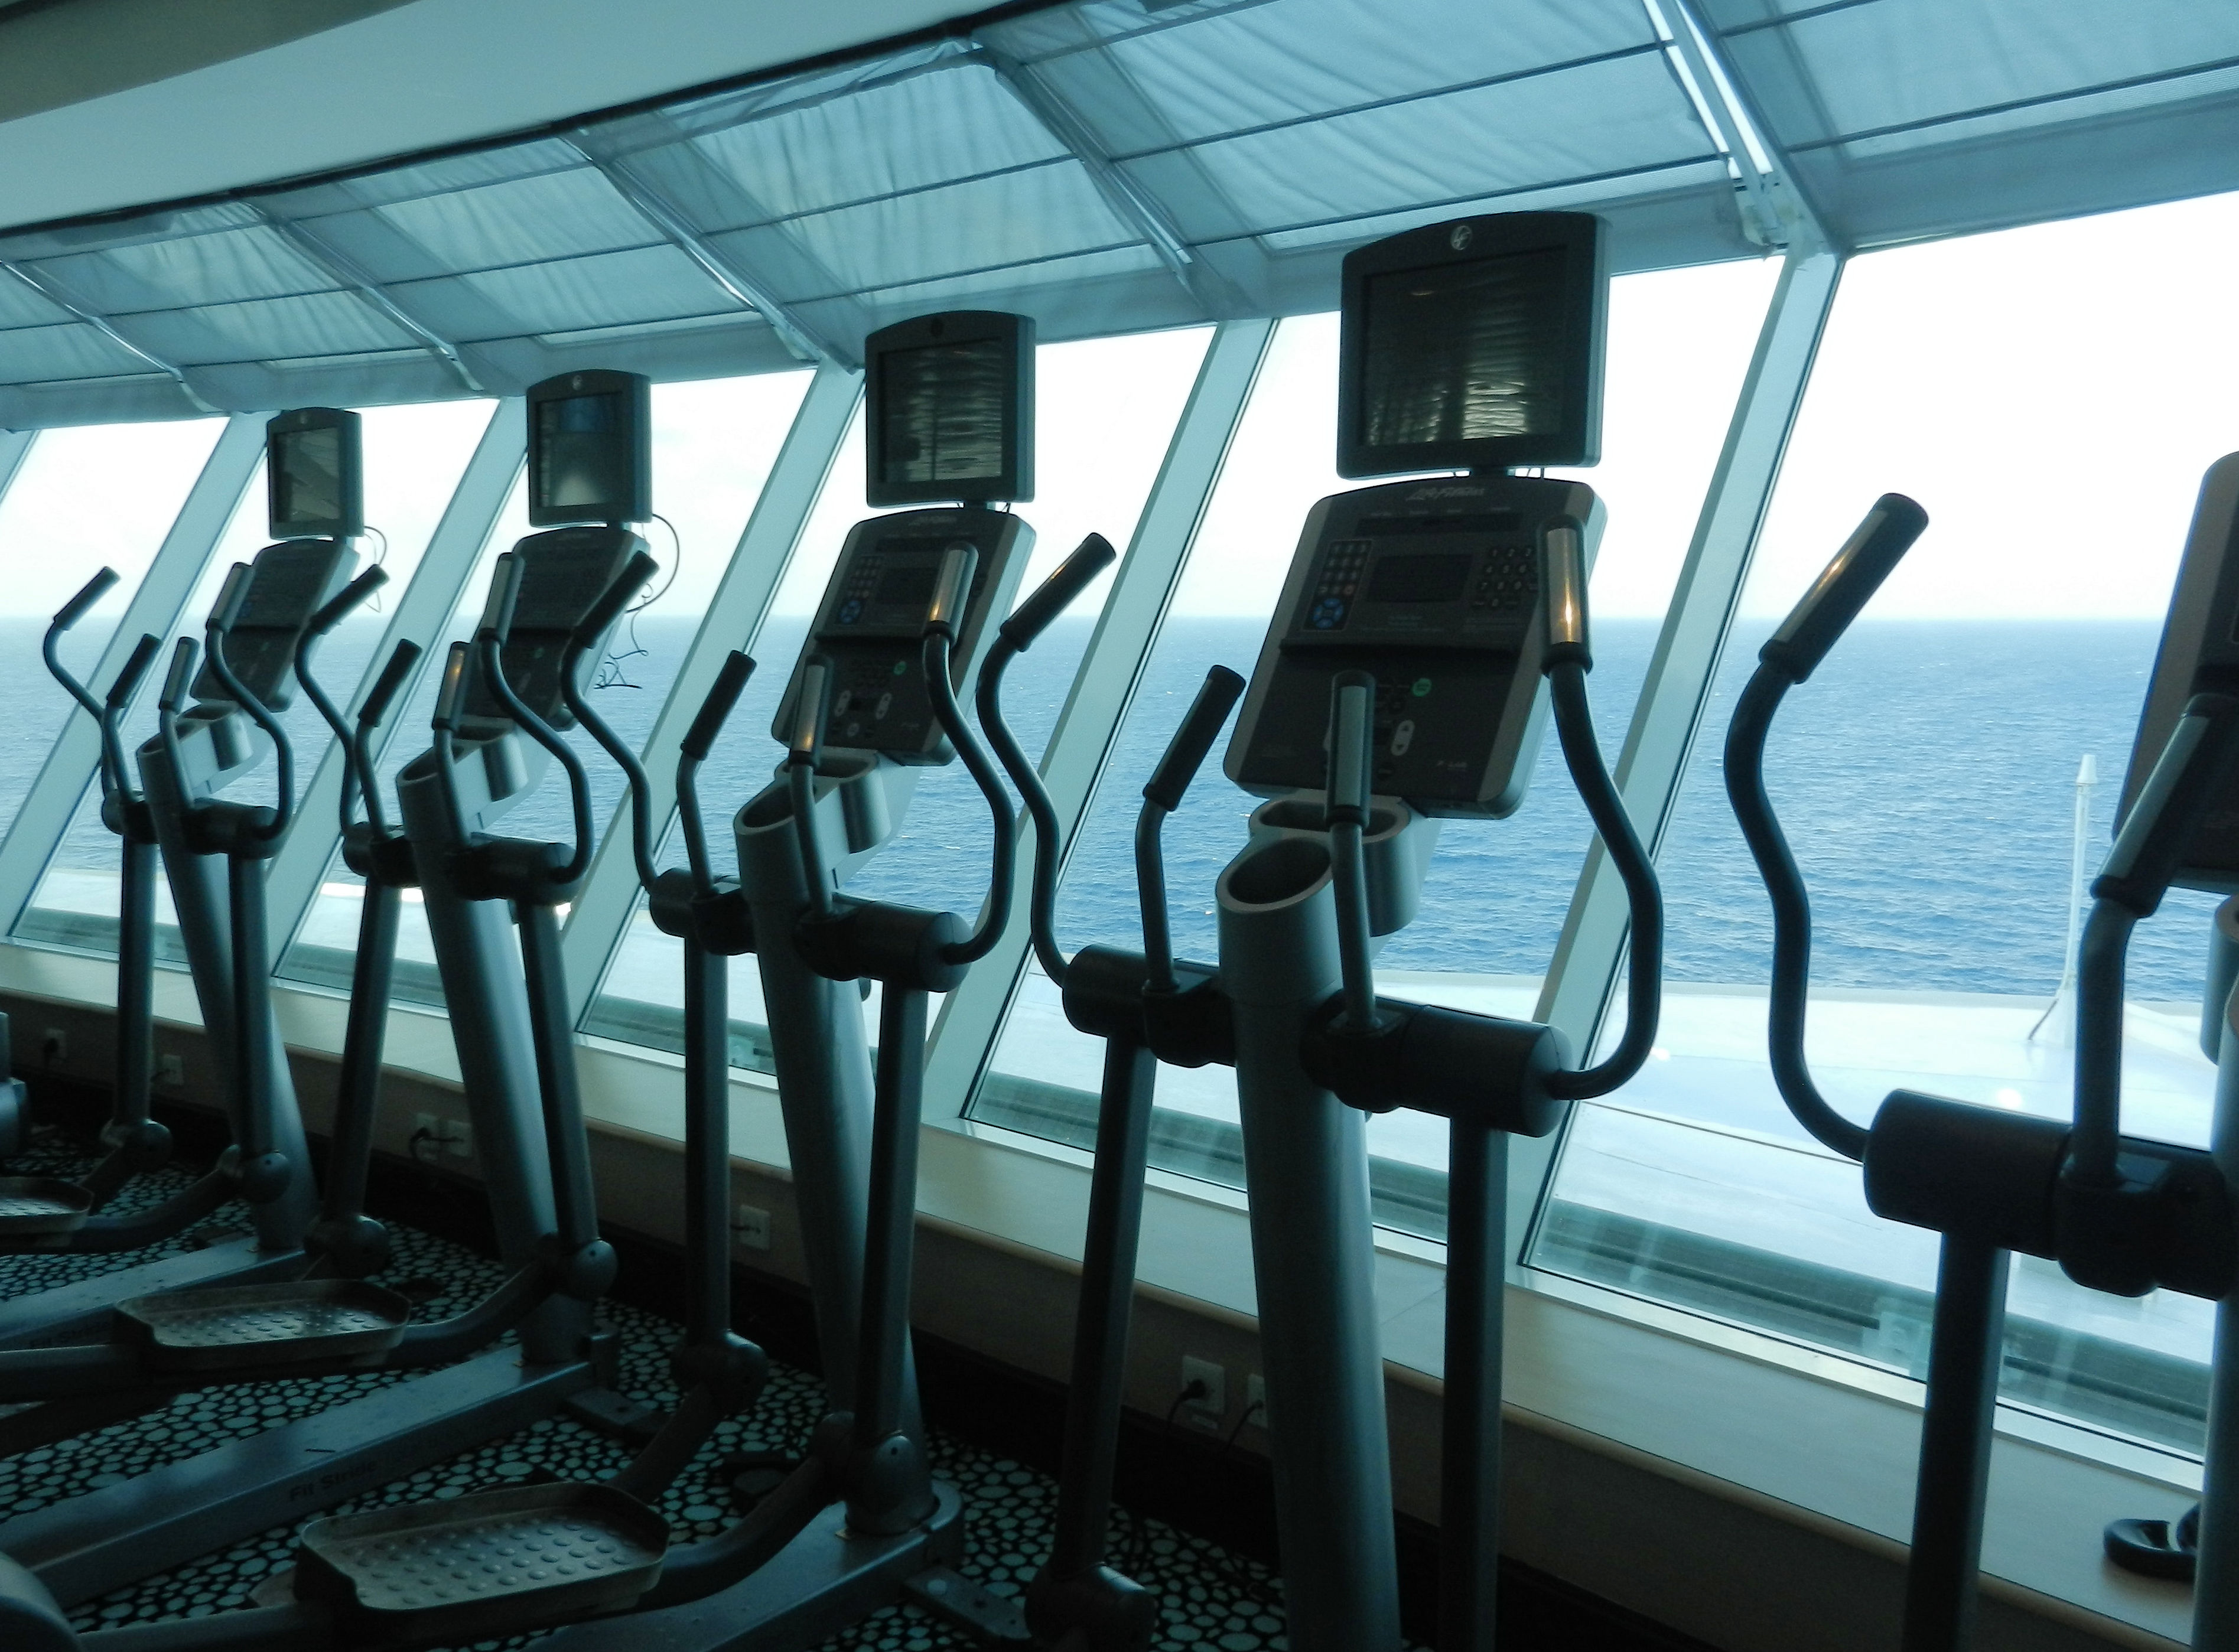 exercise equipment on a cruise ship